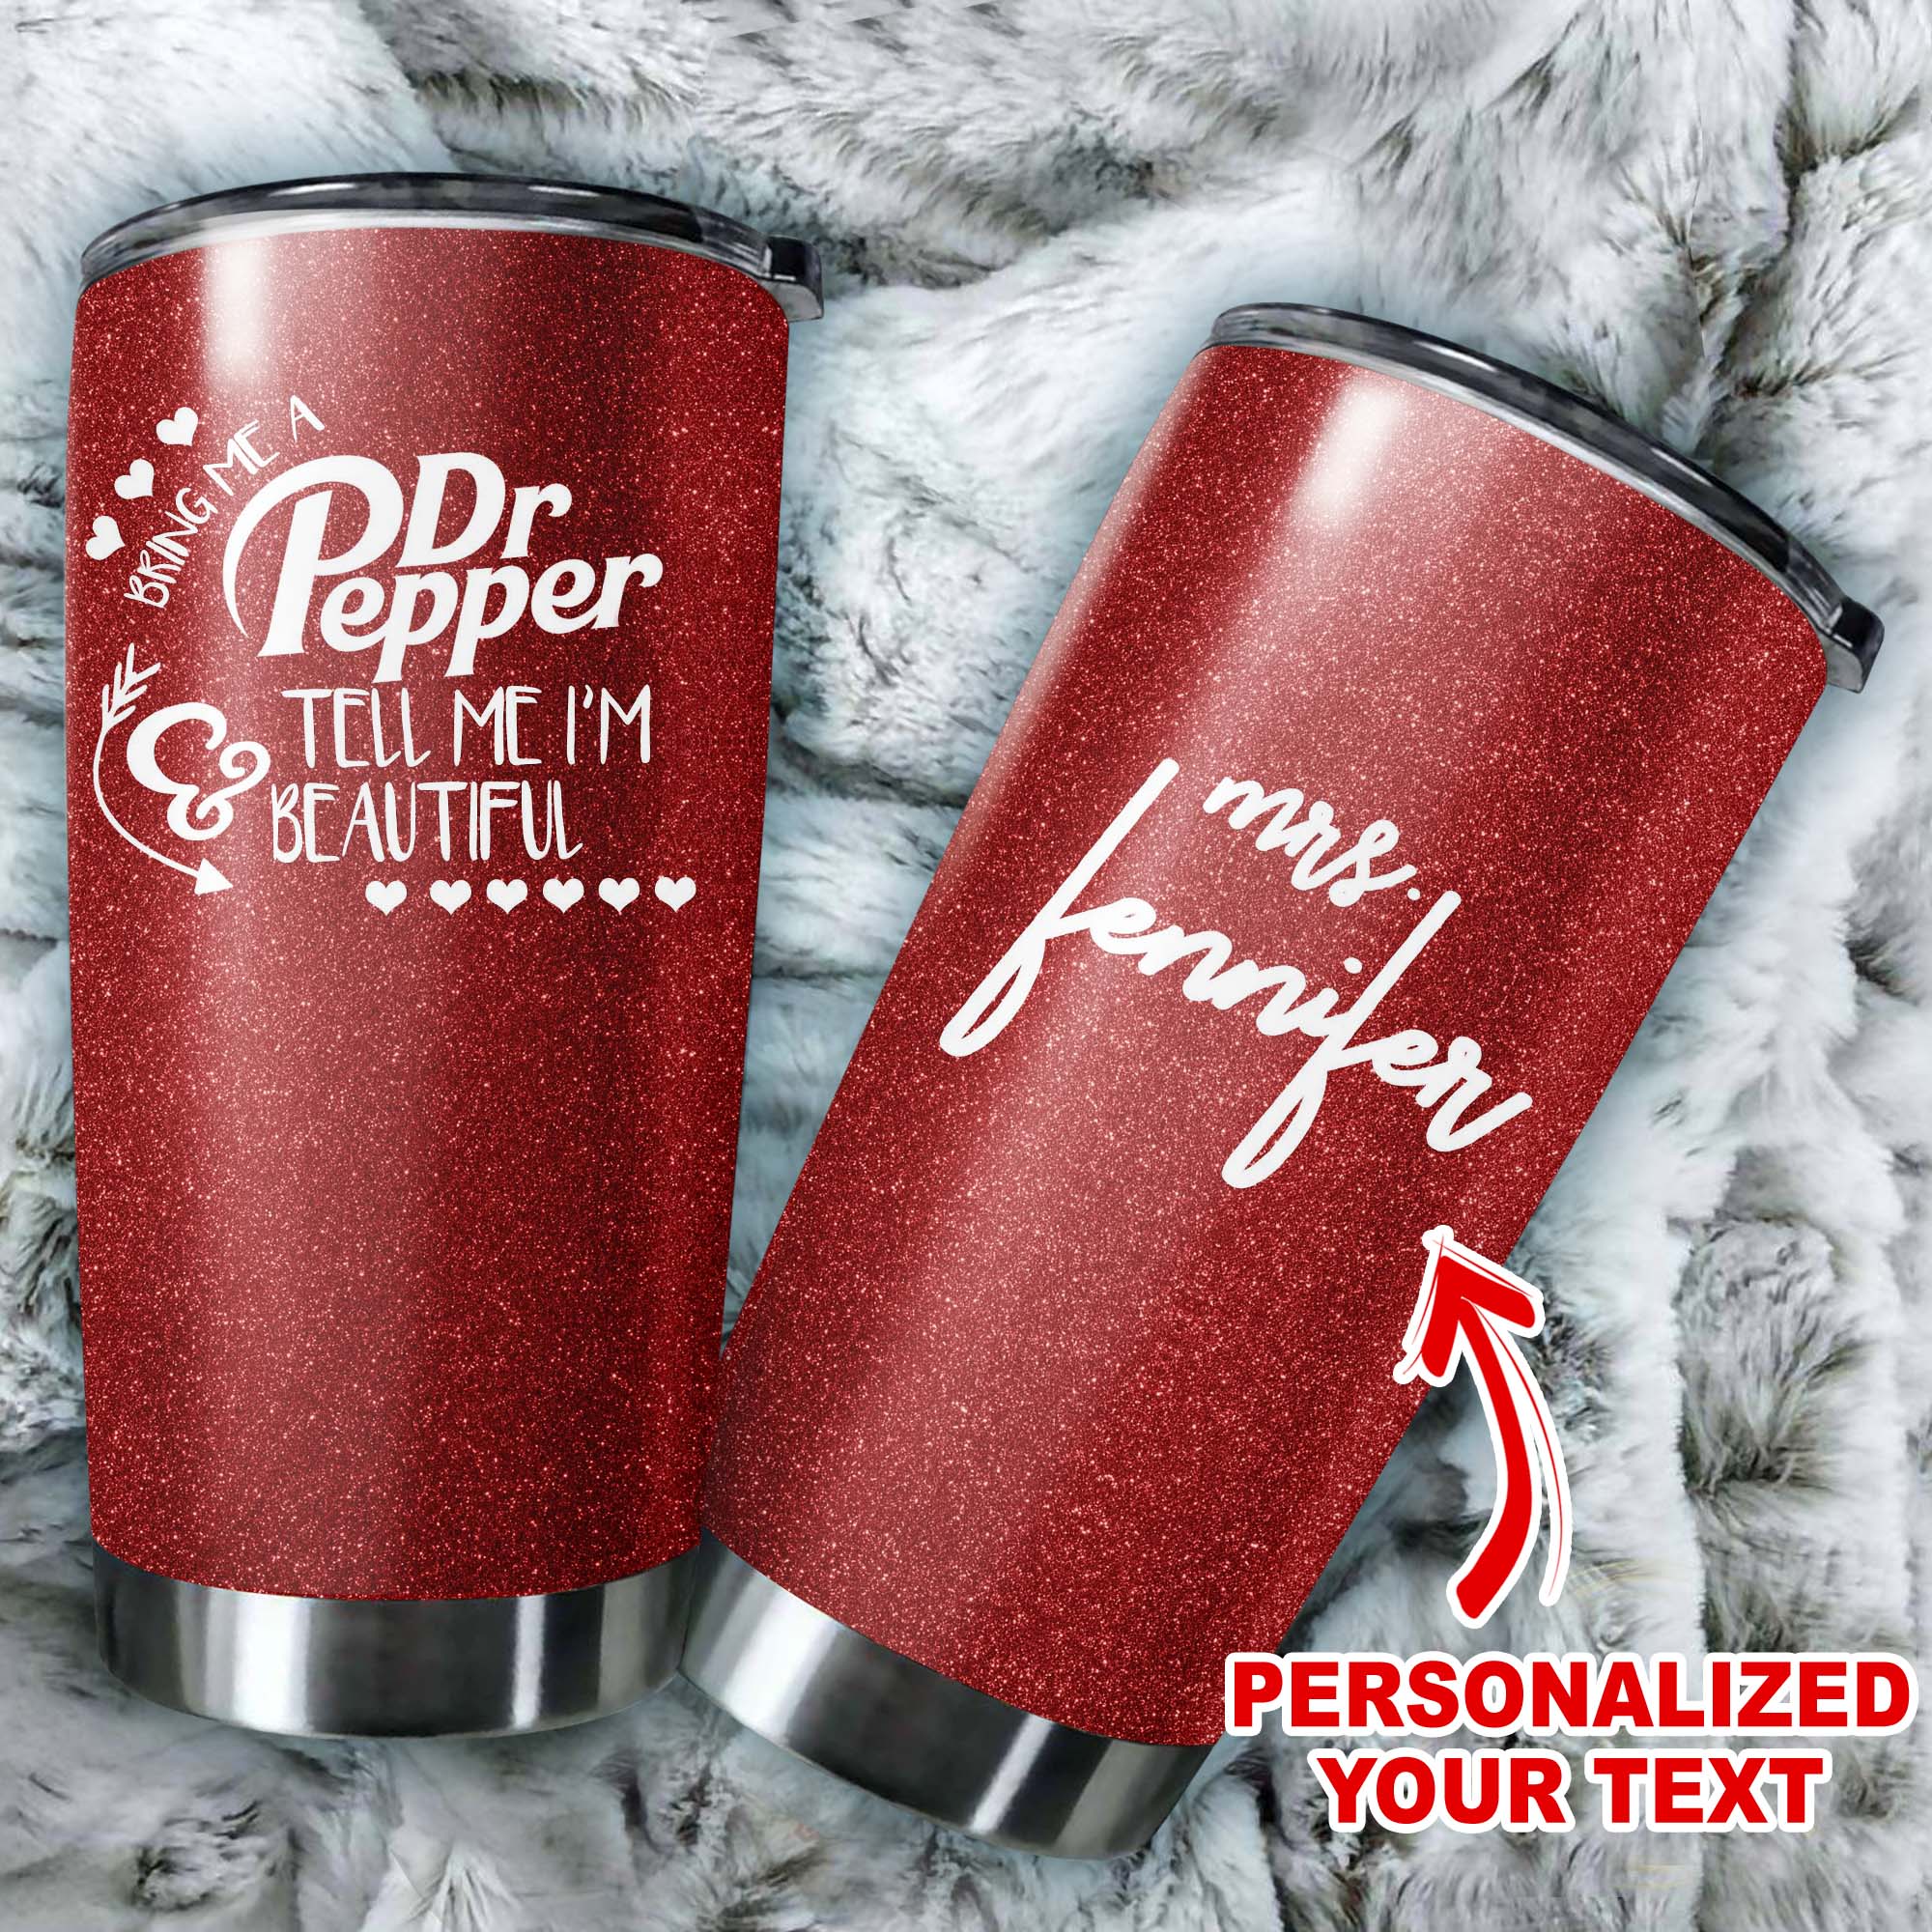 Personalized dr pepper tell me i’m beautiful all over printed tumbler – maria